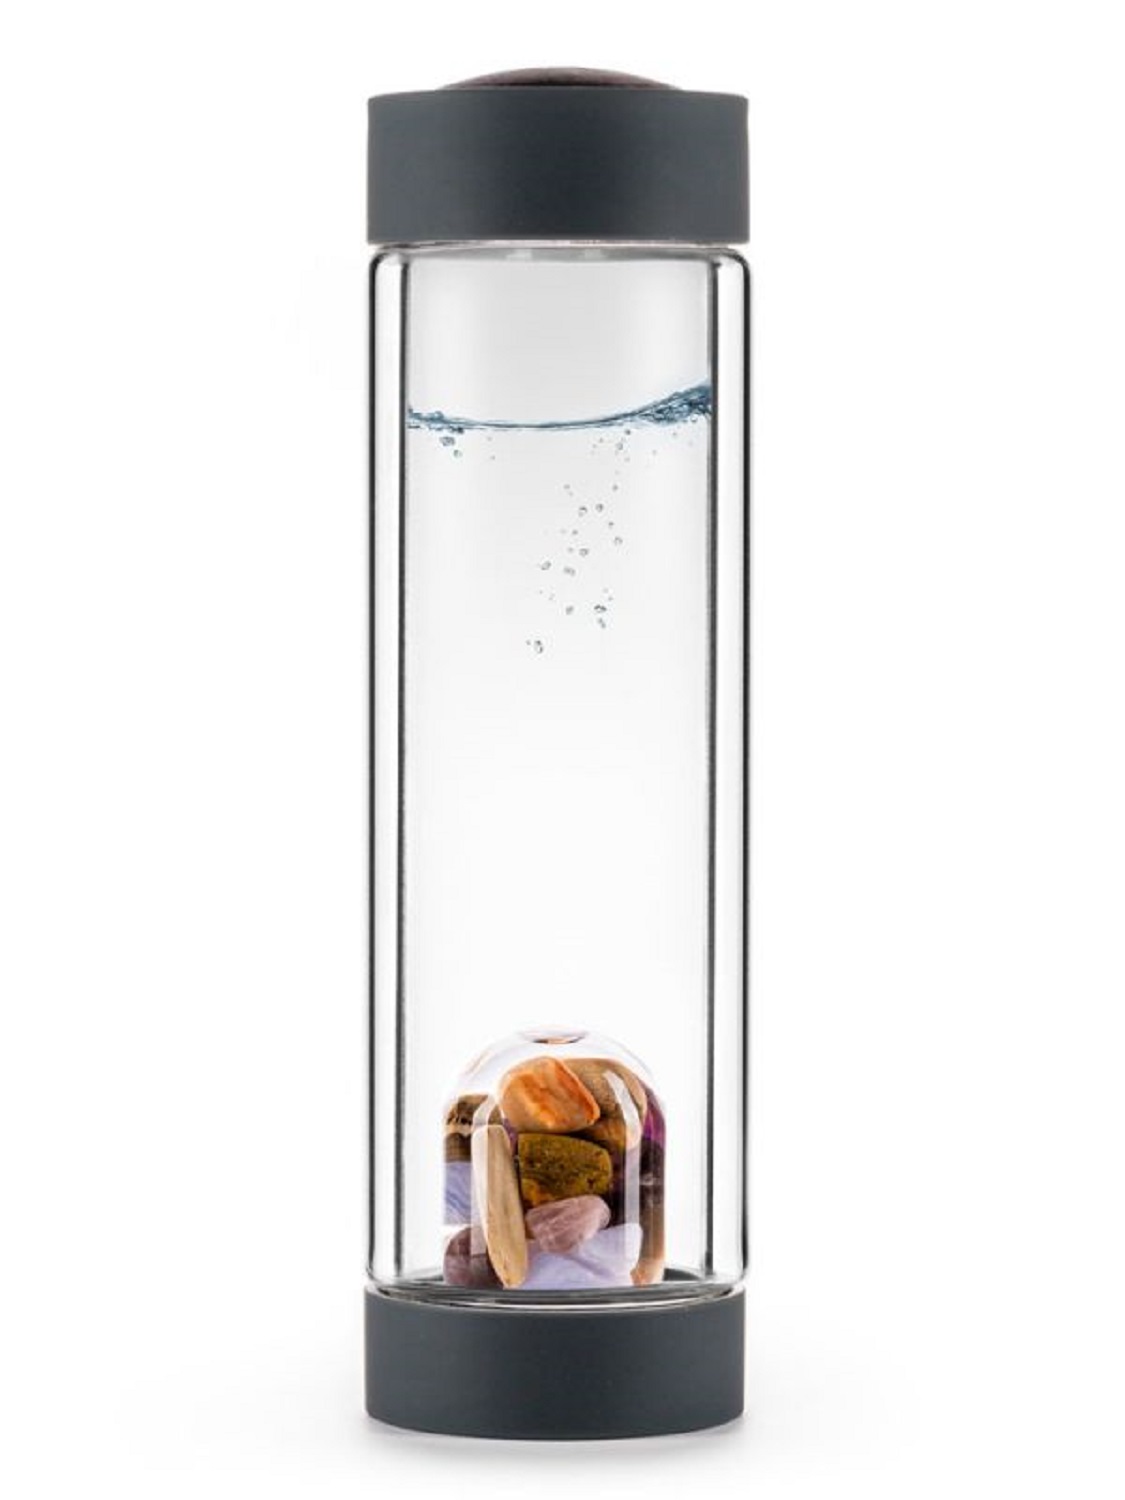 Via Heat 5 Elements Insulated Crystal Infusion Bottle